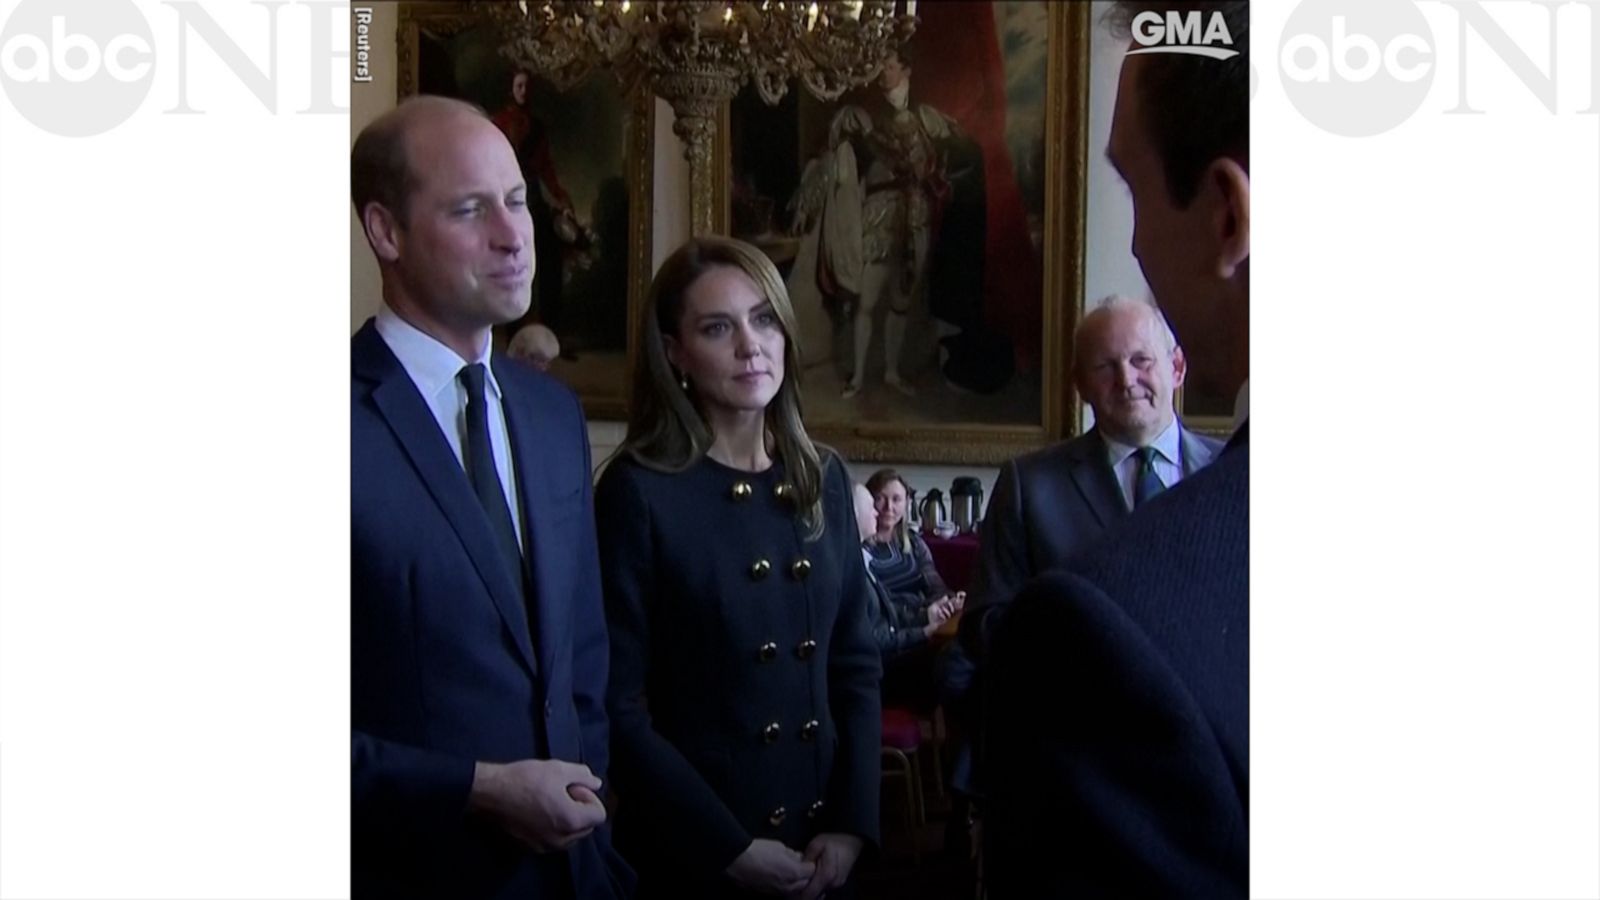 VIDEO: Prince William, Kate thank staff involved in Queen Elizabeth II’s funeral